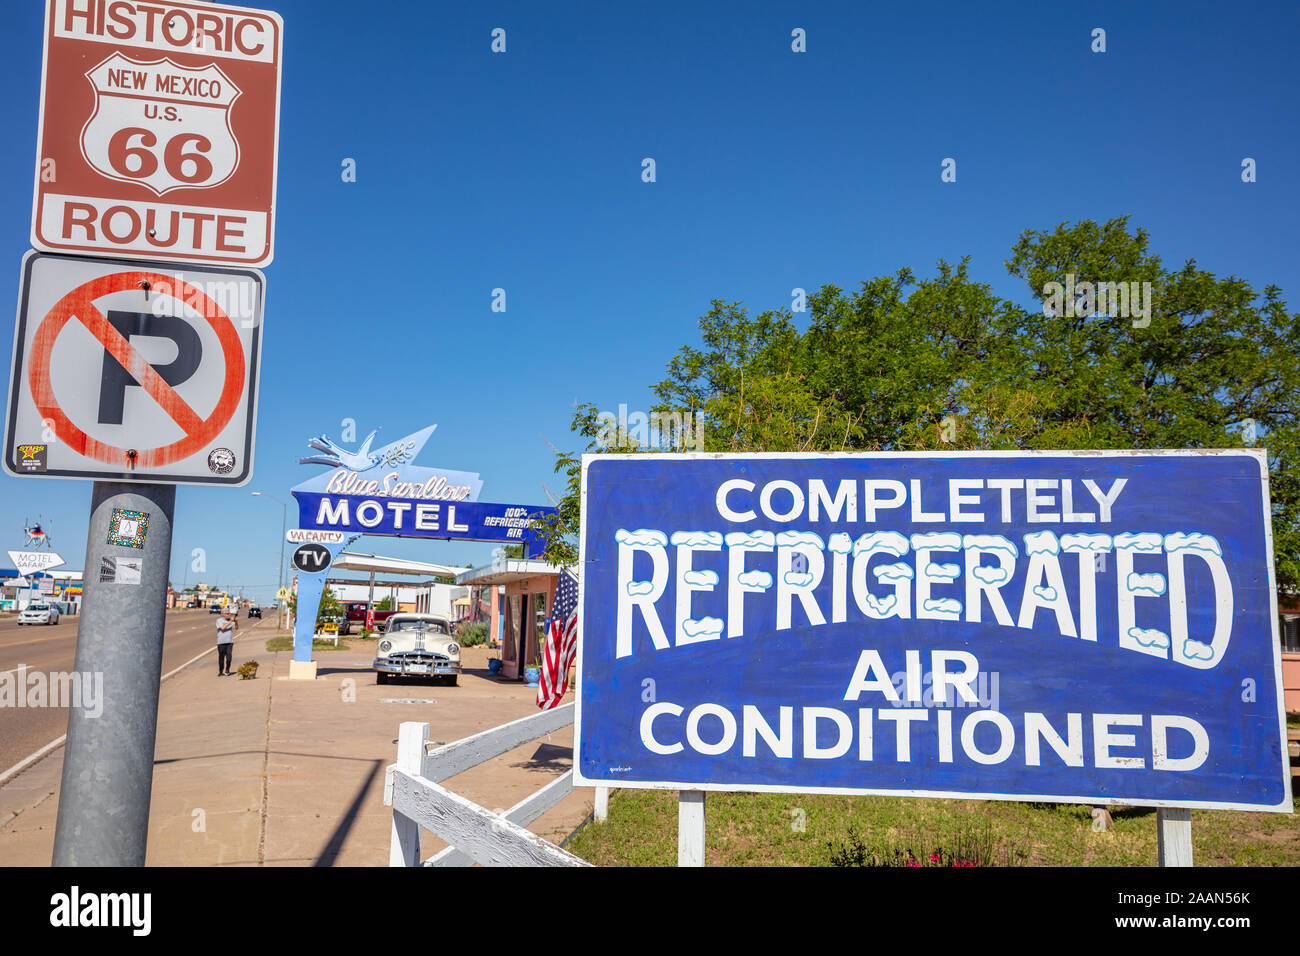 Tucumcari, New Mexico, USA. May 14, 2019. Motel Blue Swallow next to route 66. A pontiac car is parked at the entrance. Signs inform tourists about th Stock Photo